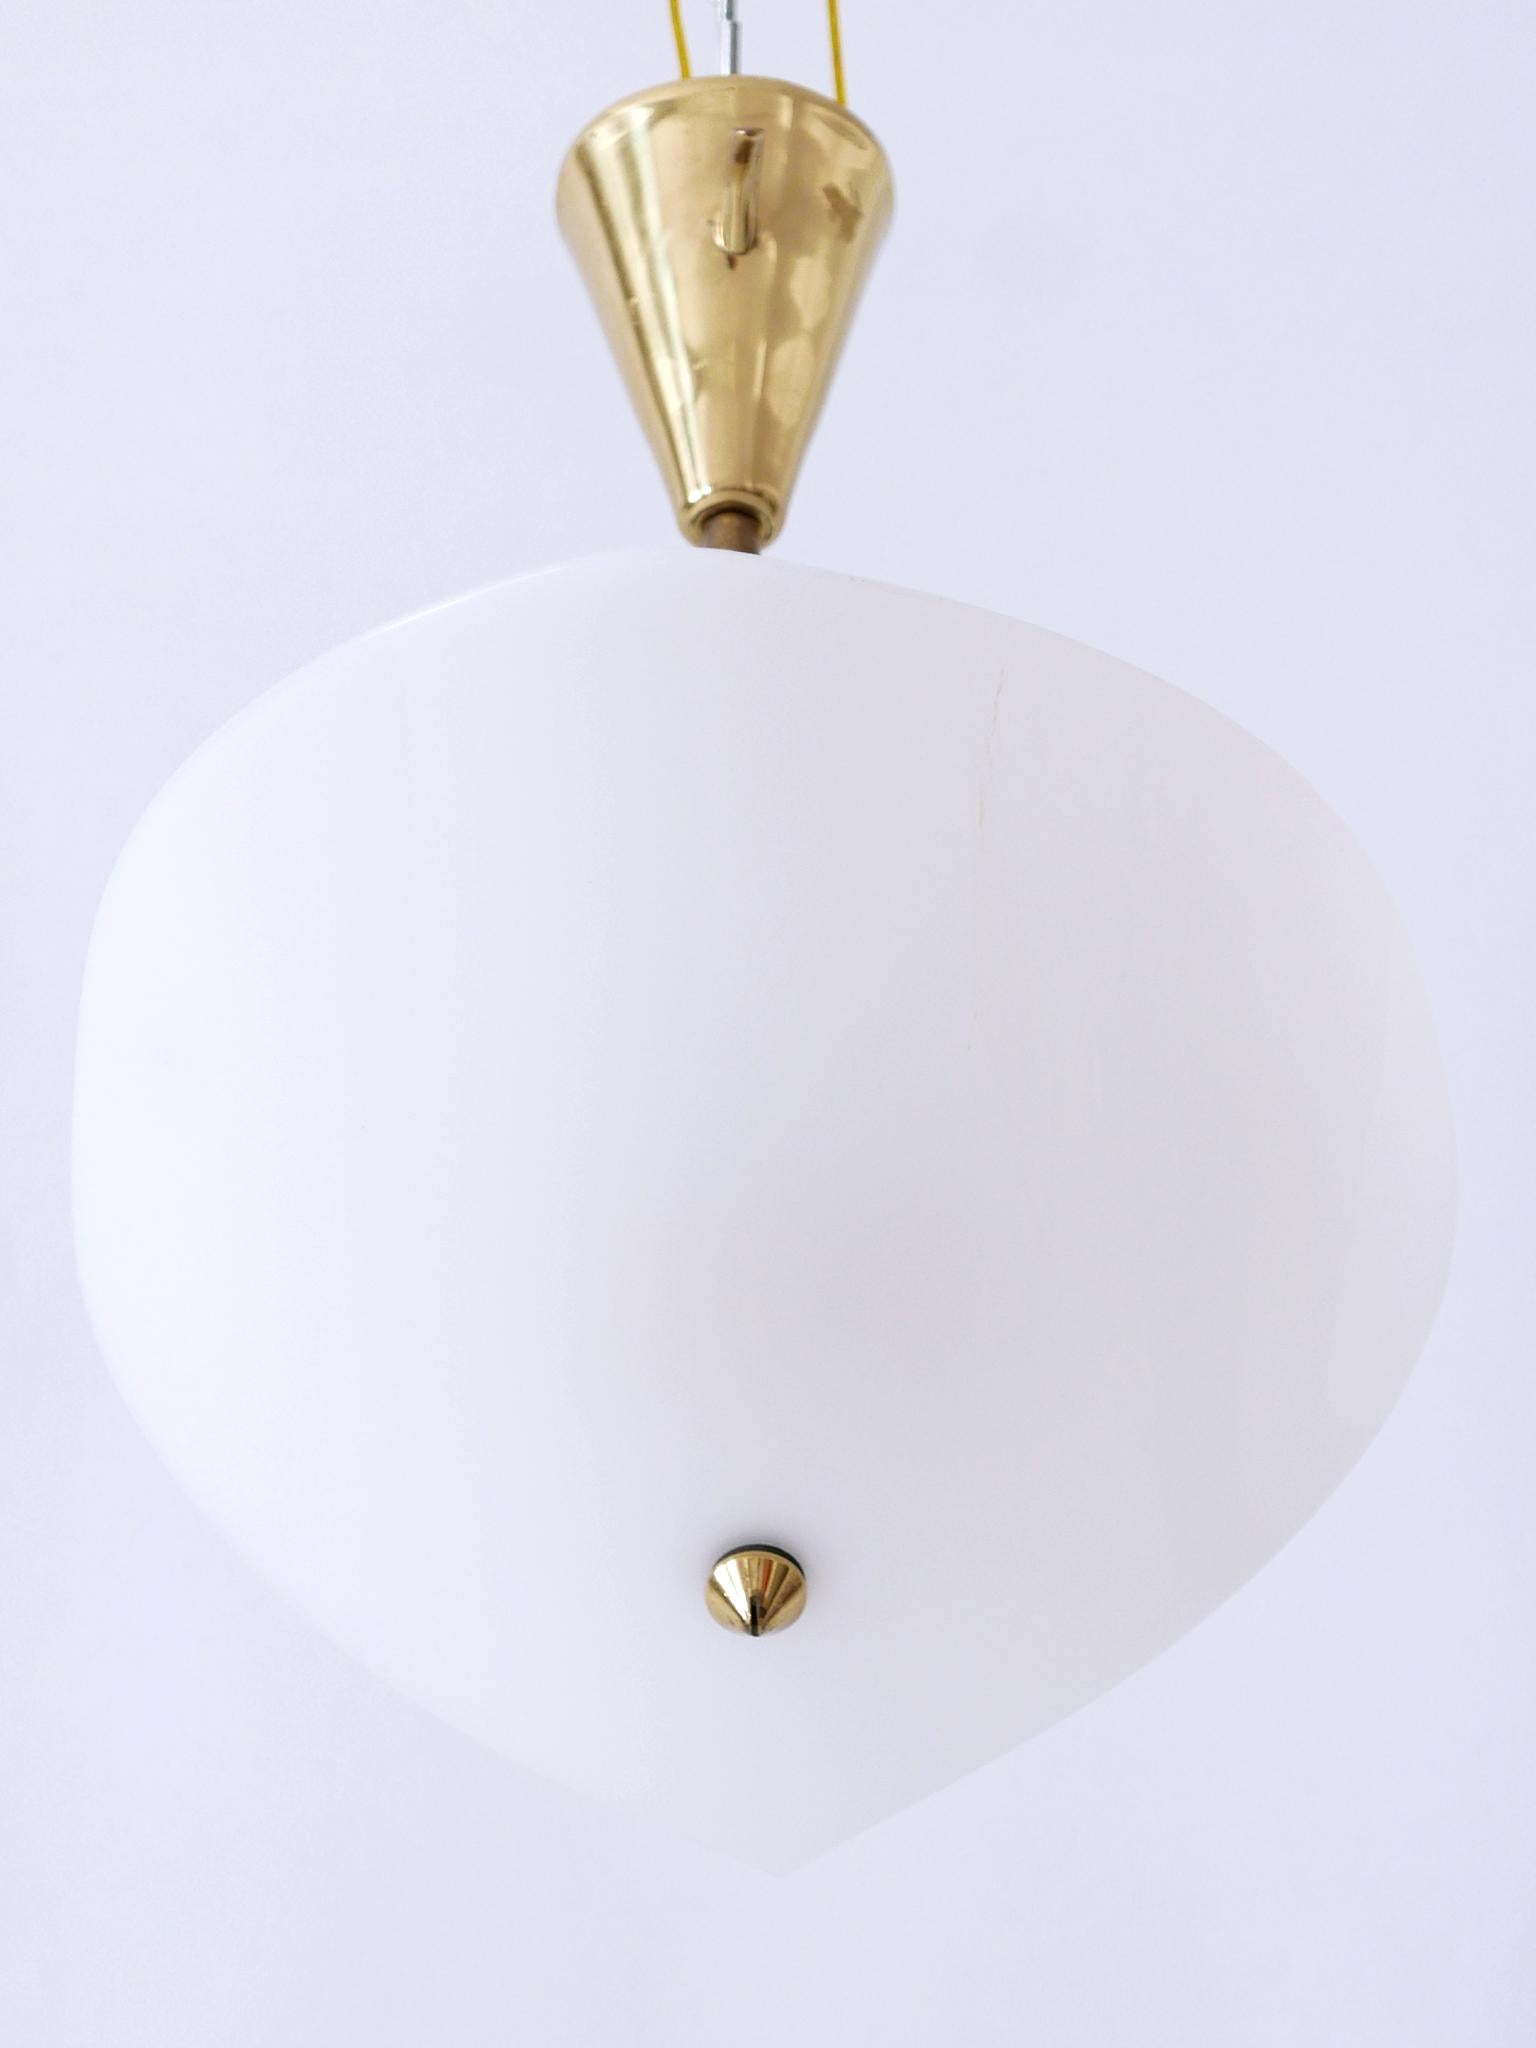 Extremely Rare and Elegant Lucite & Brass Ceiling Lamp Germany 1960s For Sale 10